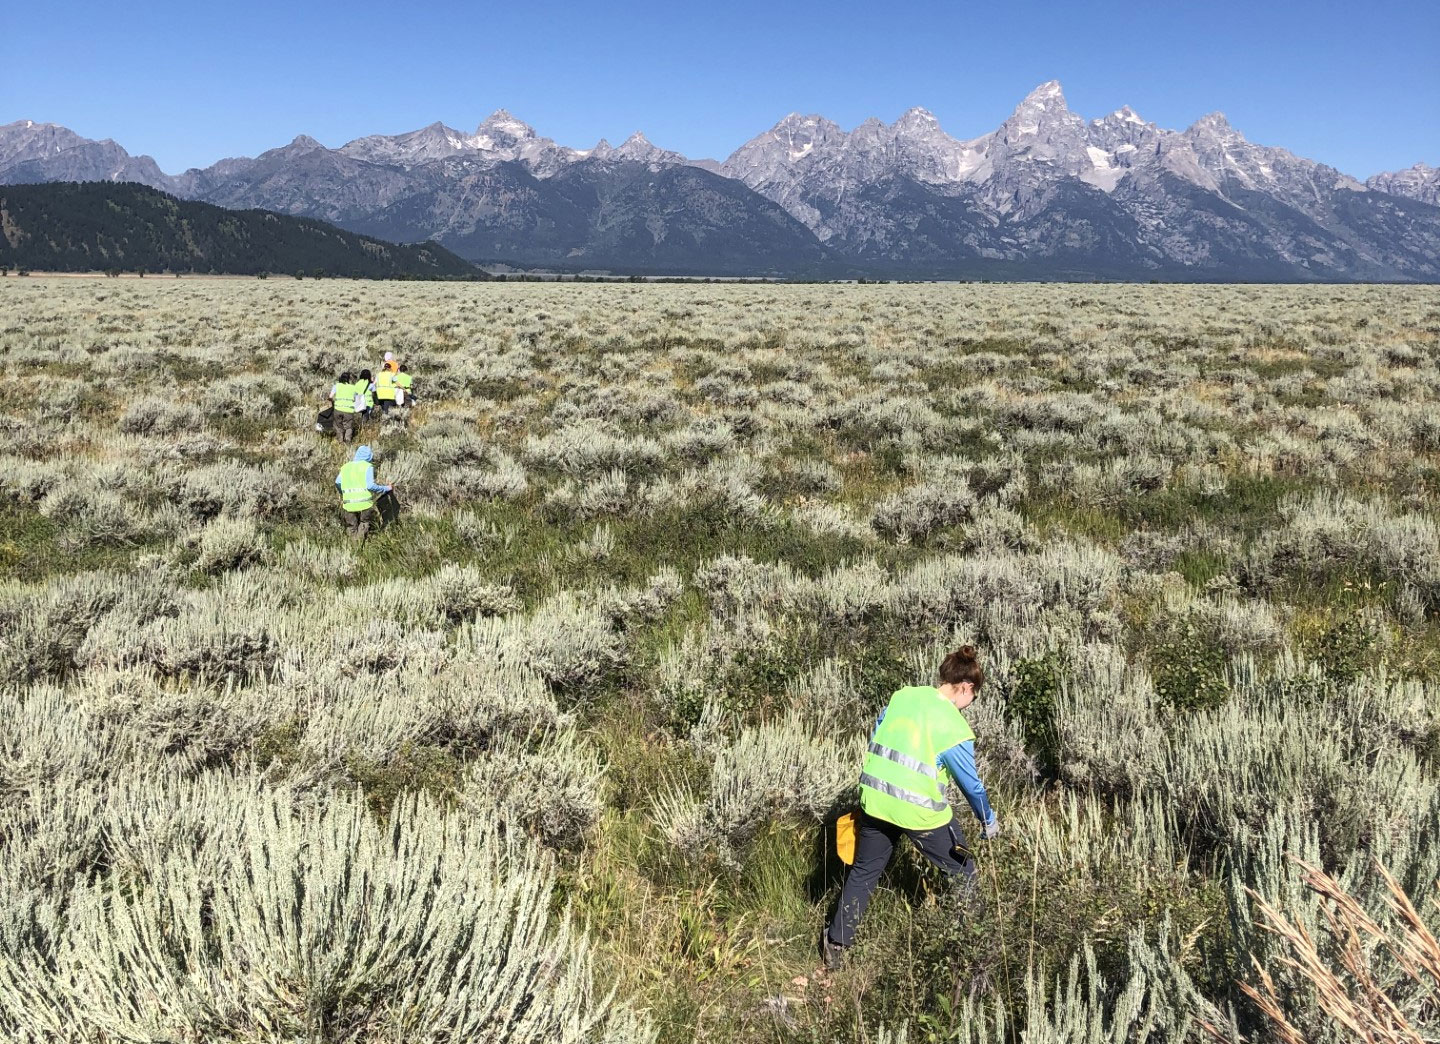 YCP crew members collect native seeds on Antelope Flats in Grand Teton National Park.